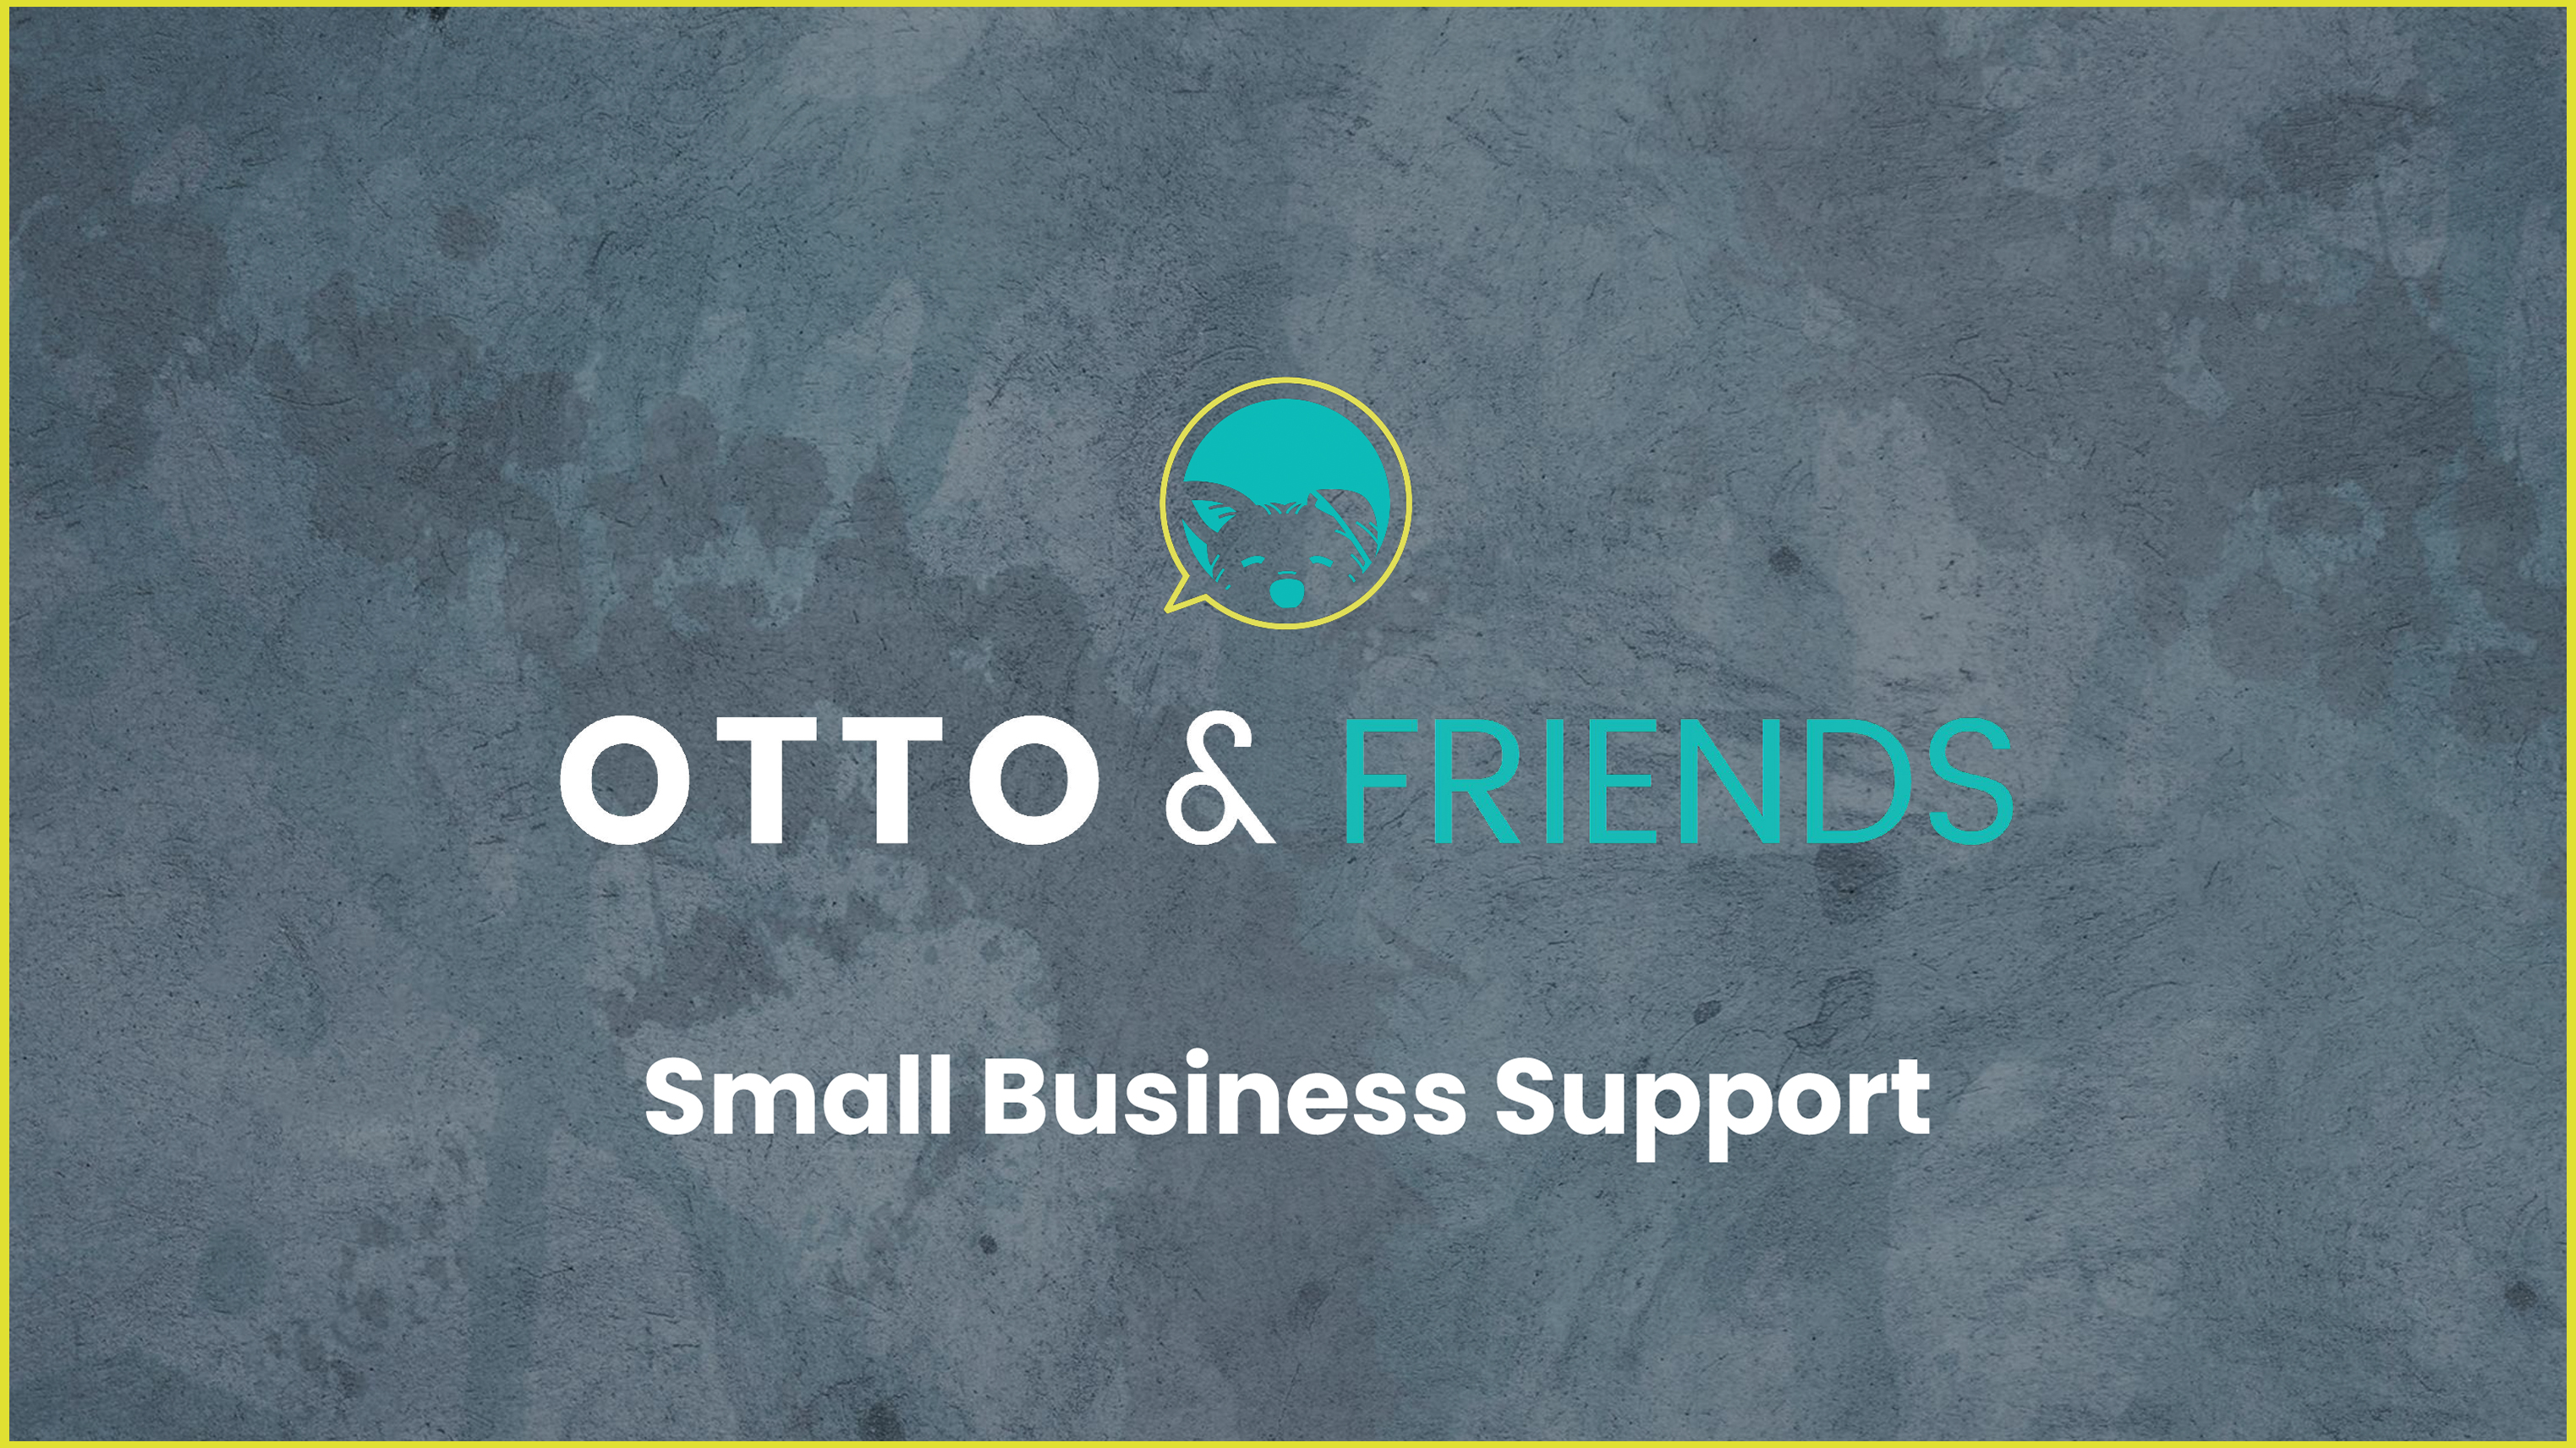 Otto & Friends: Small Business Support